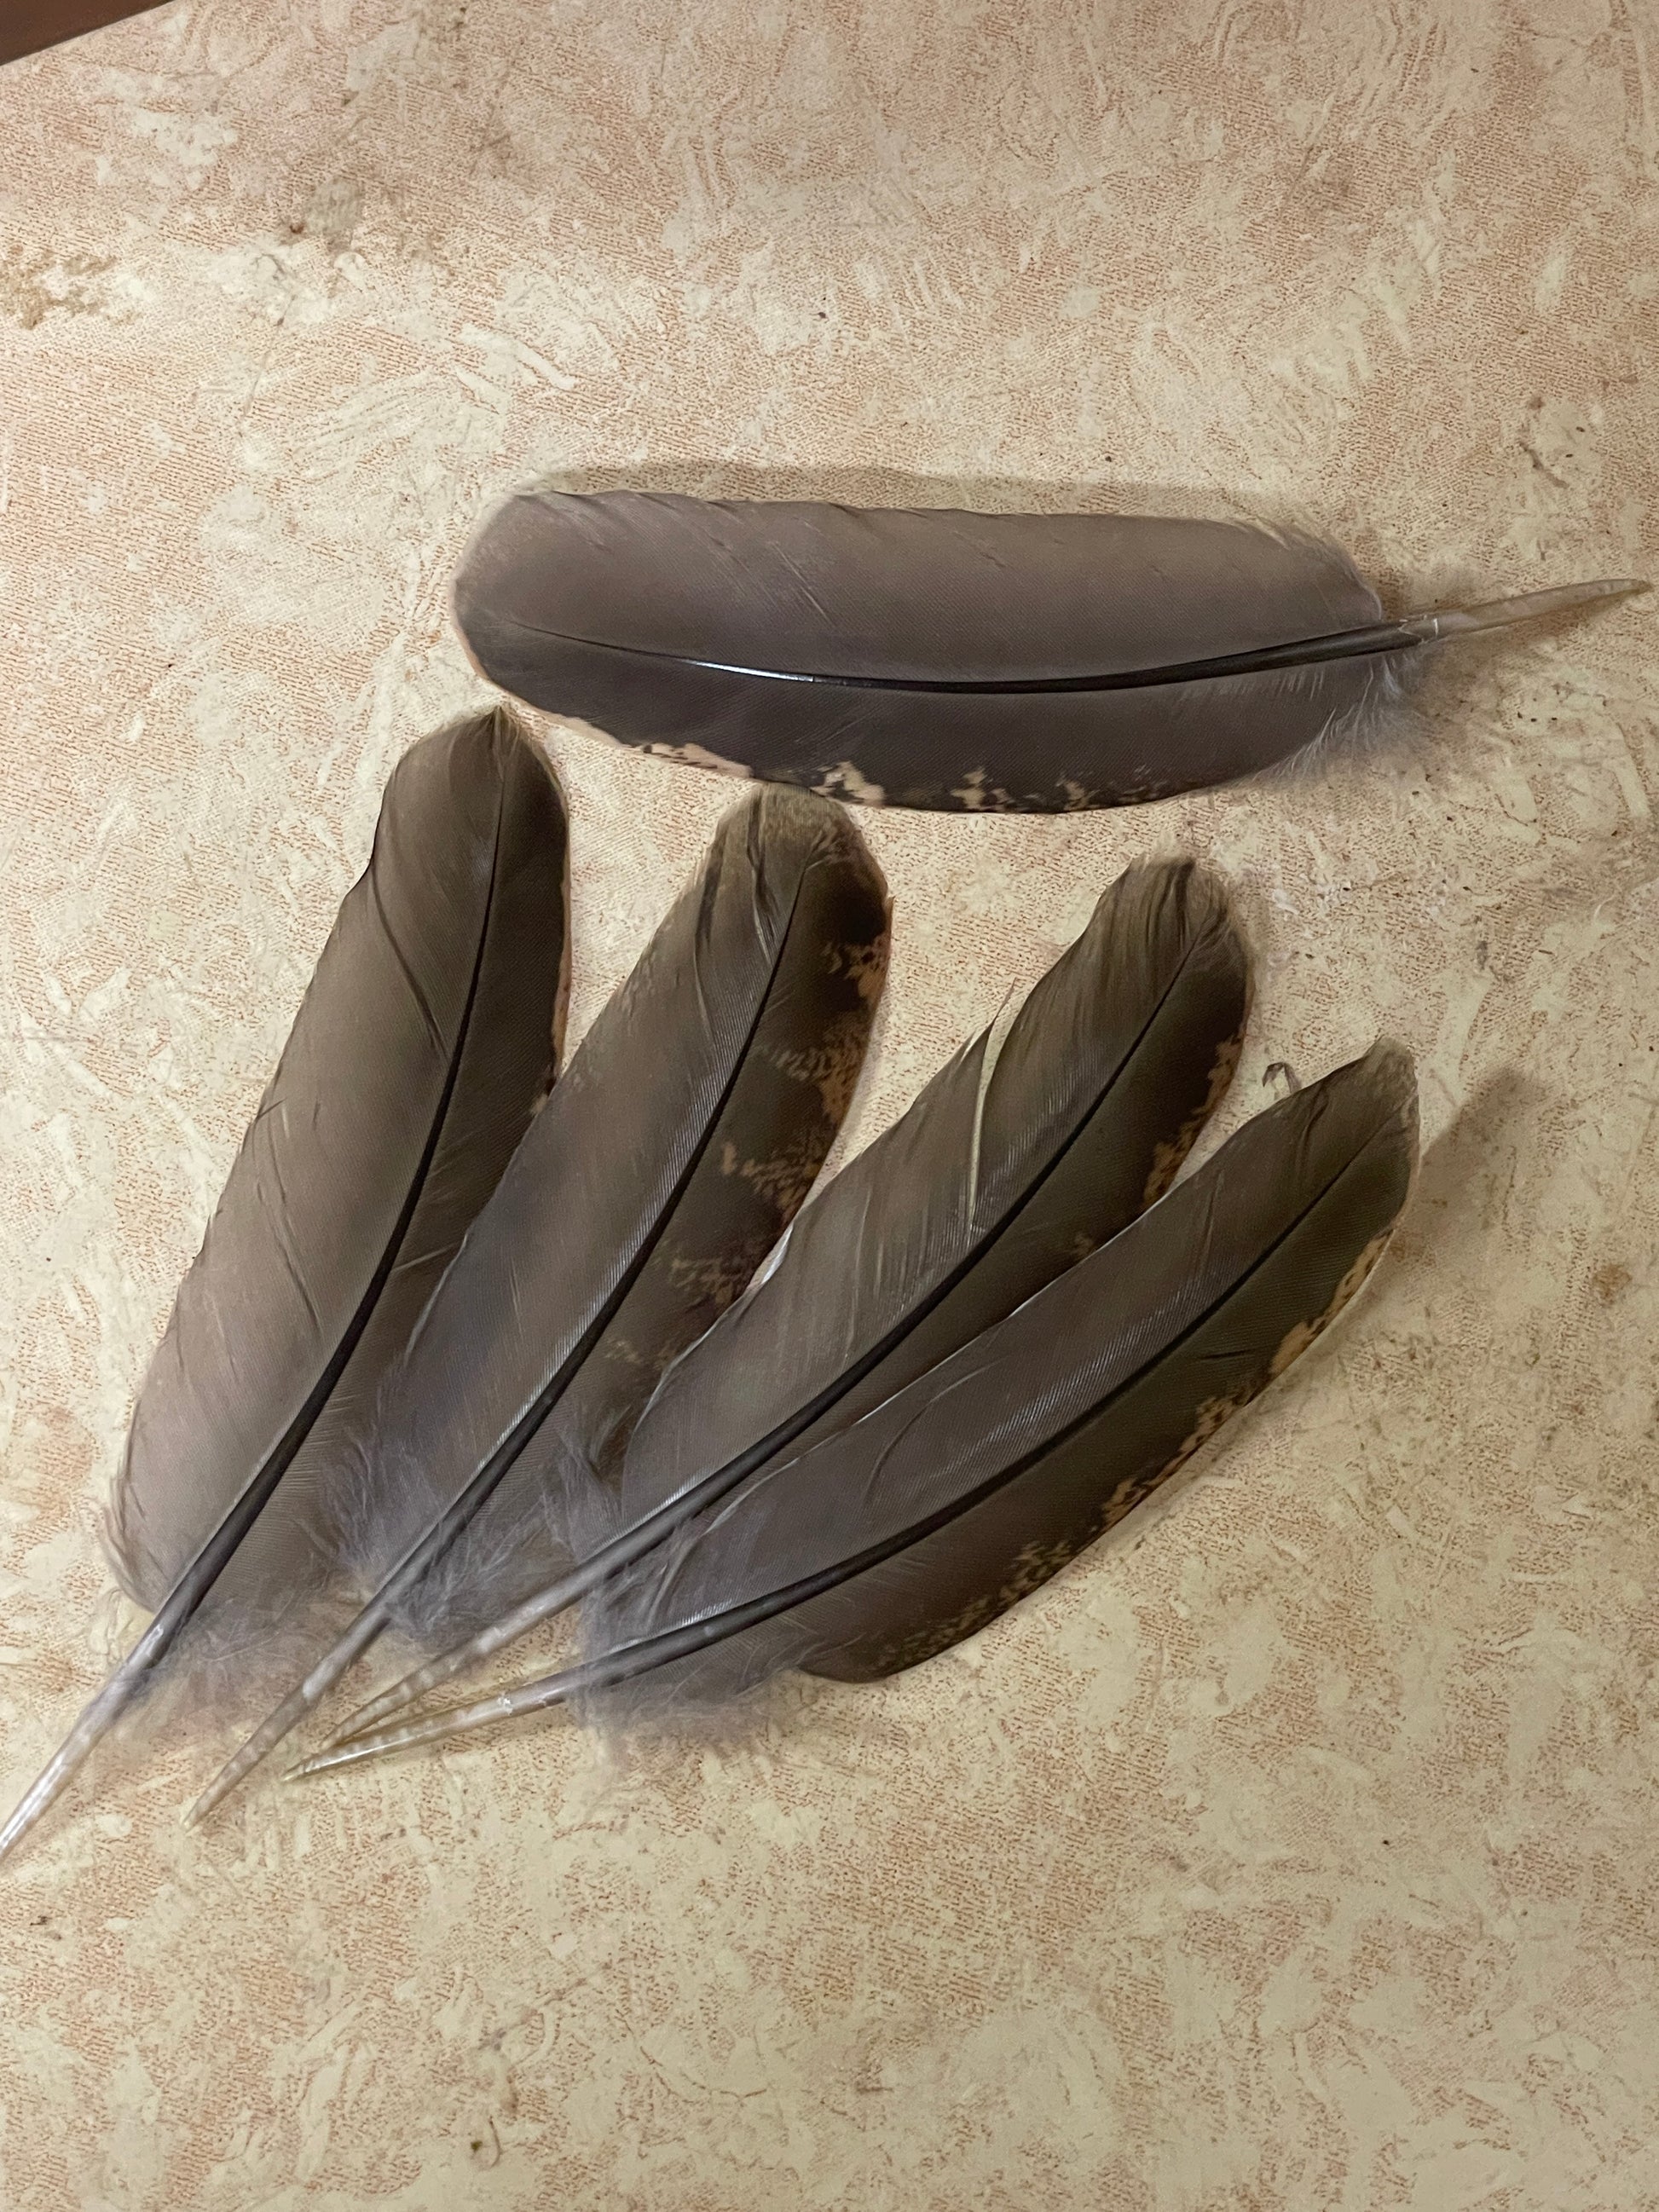 Partridge Wing Feather | Ruffed Grouse Wing Feathers